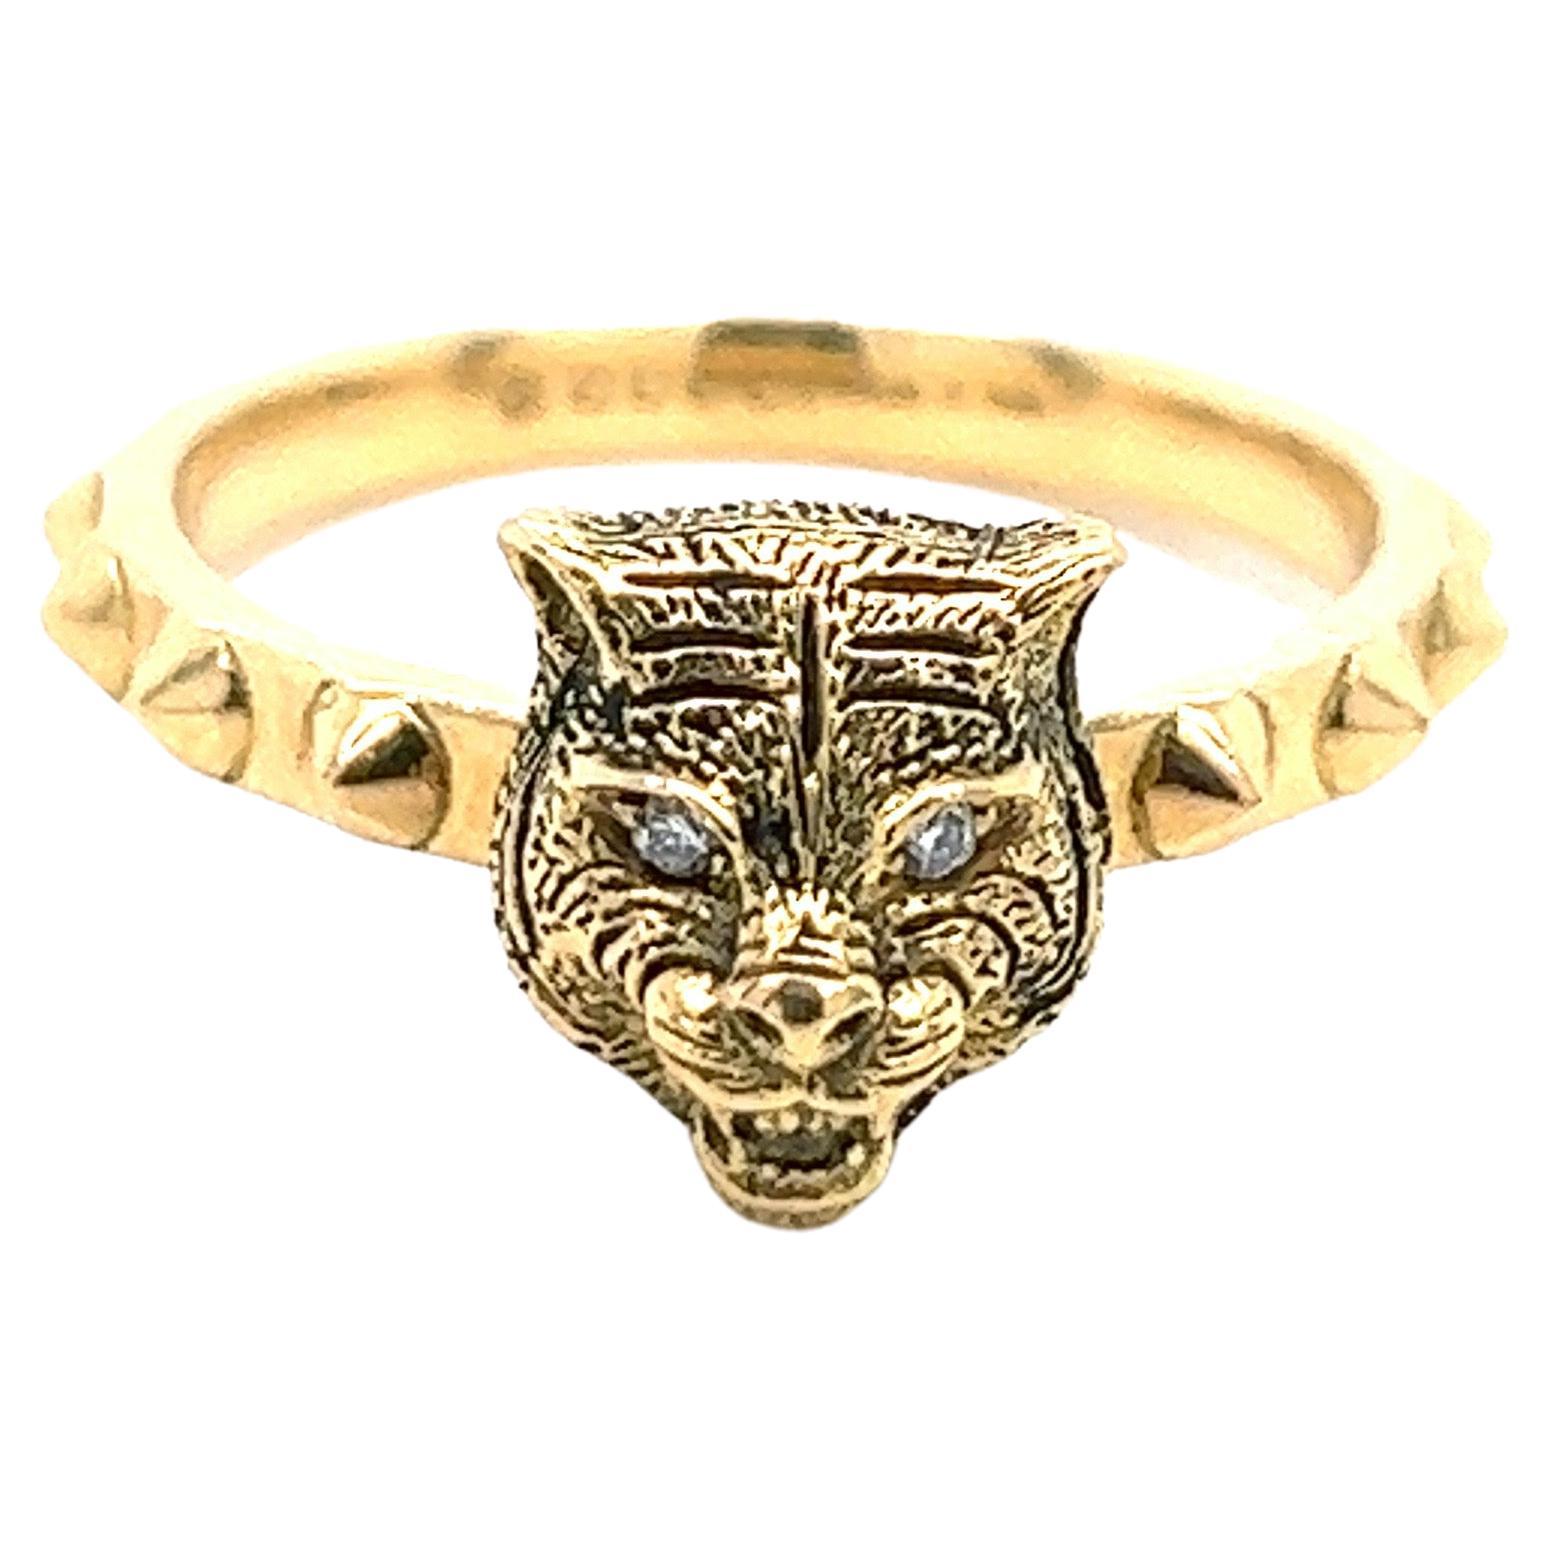 Gucci Tiger Head Ring - Size 5 | Rent Gucci jewelry for $55/month - Join  Switch